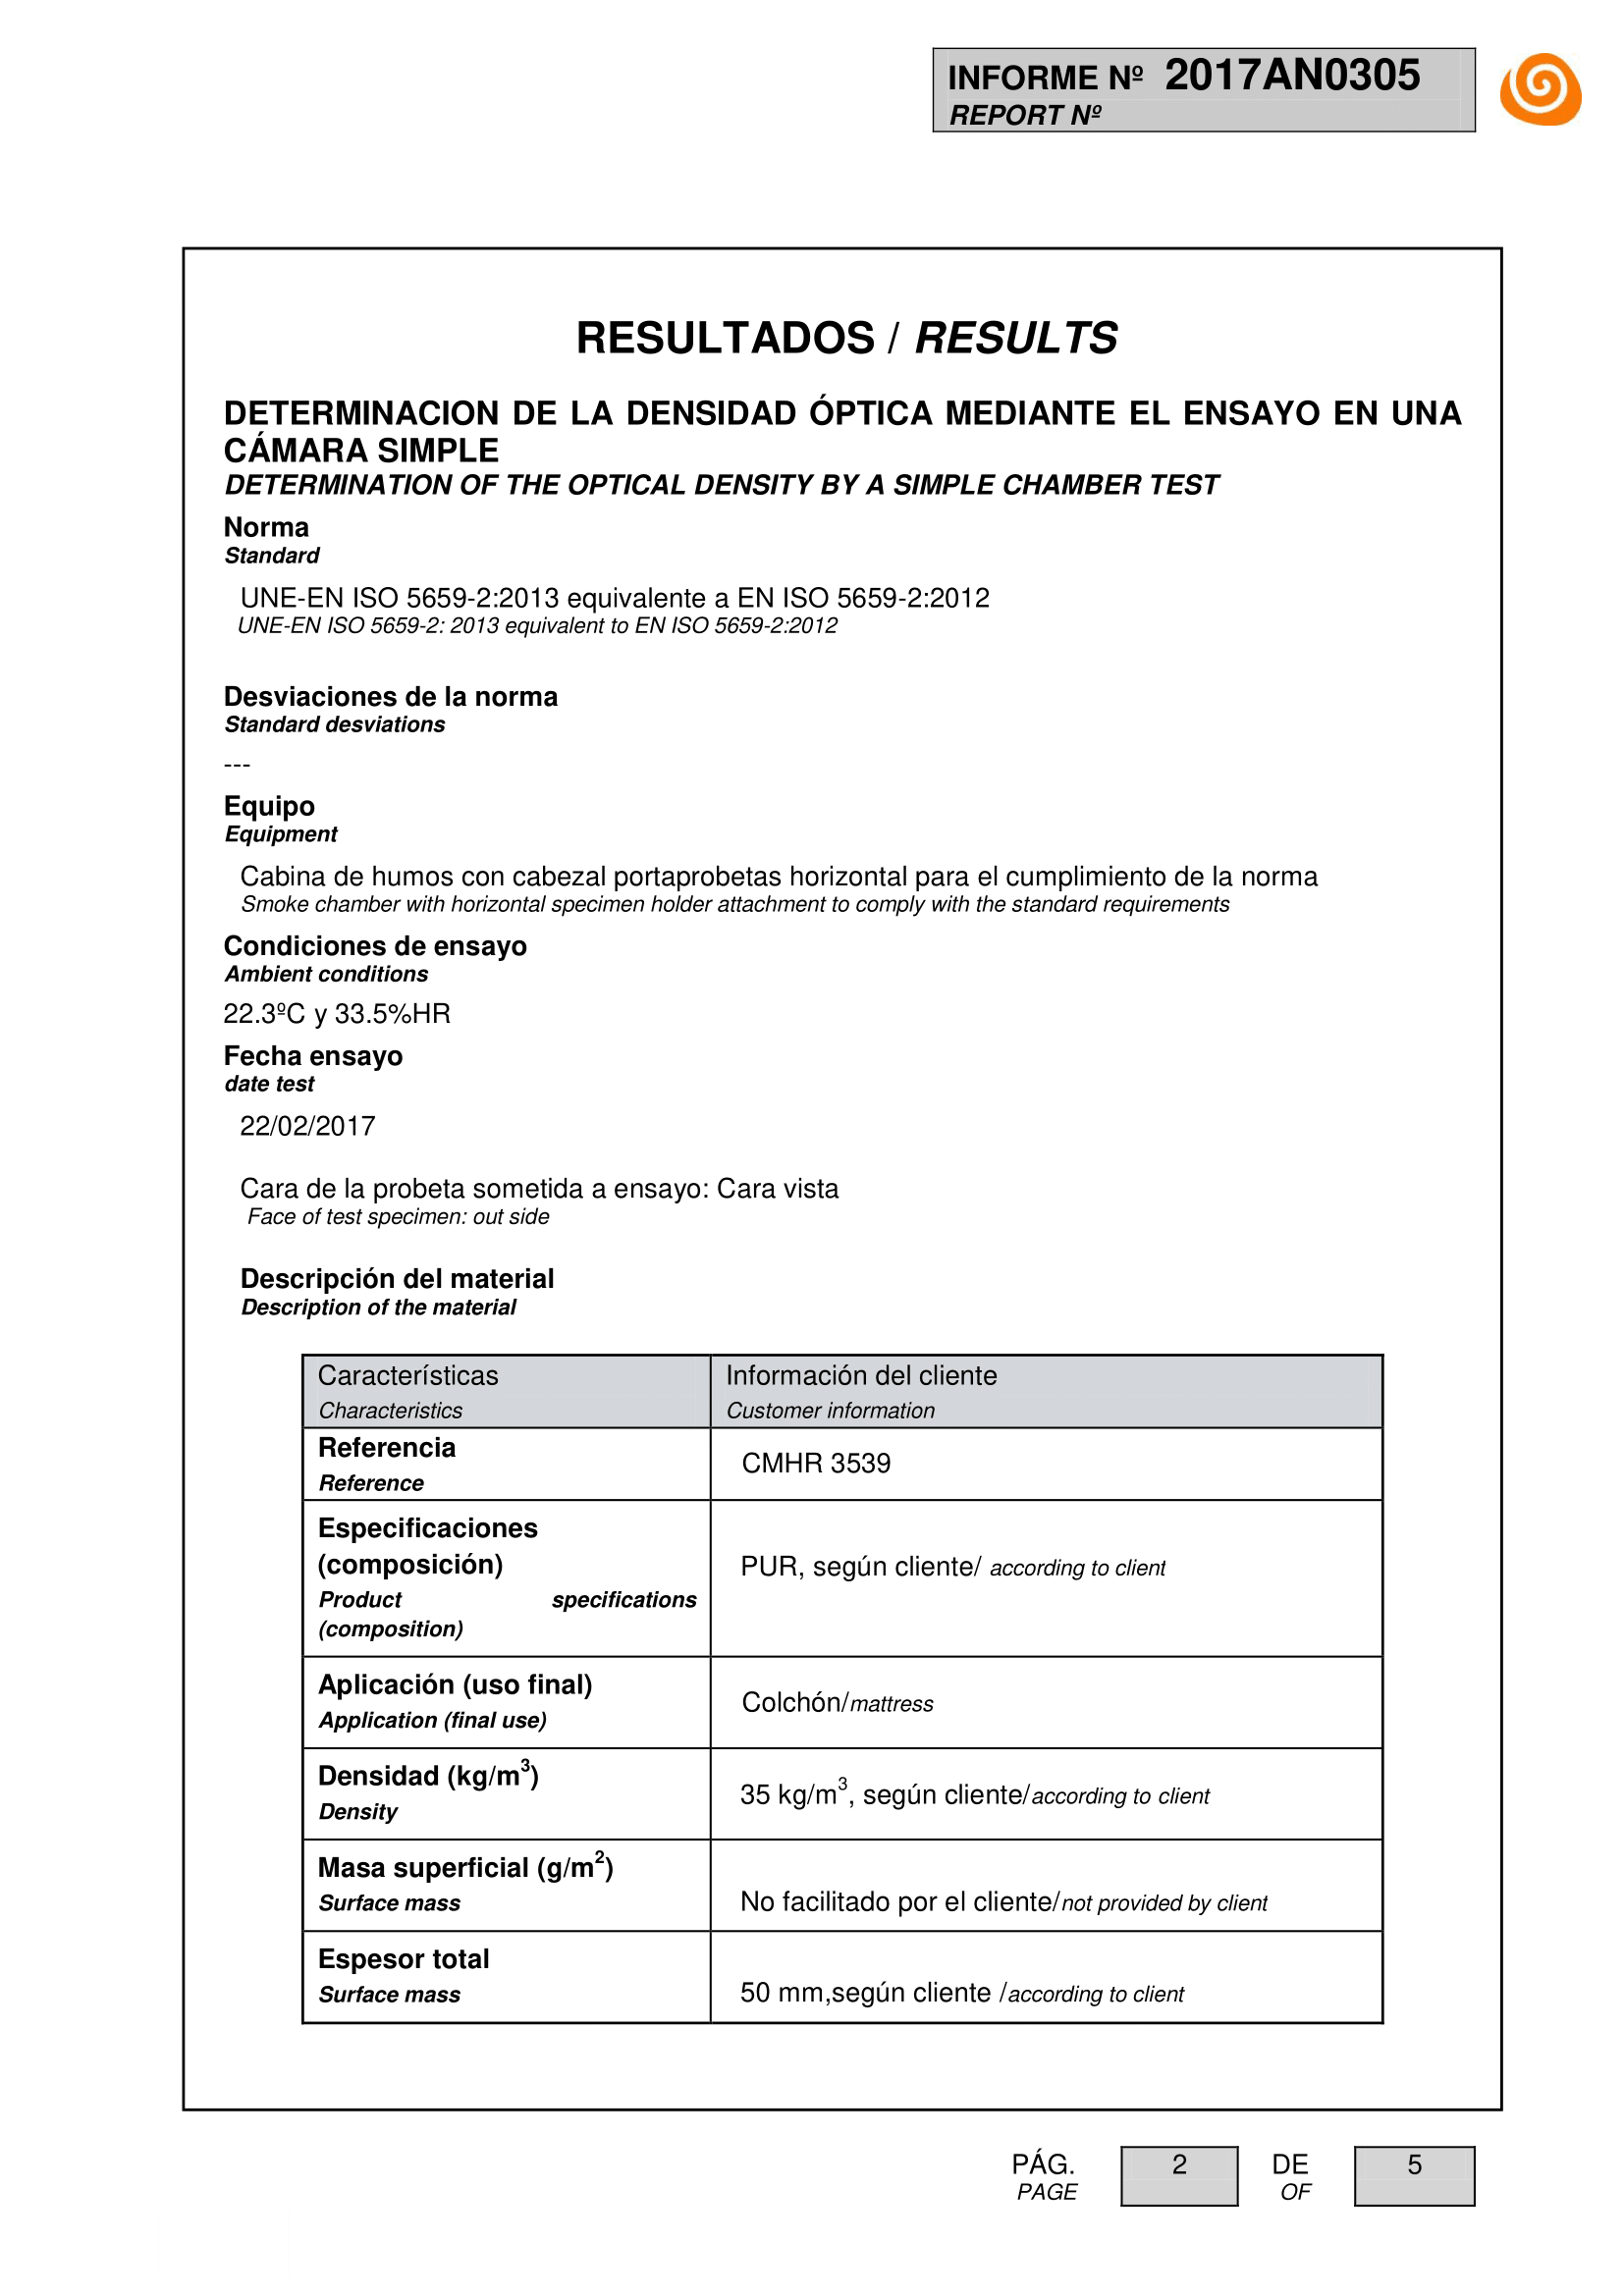 Aitex Test Report page 2